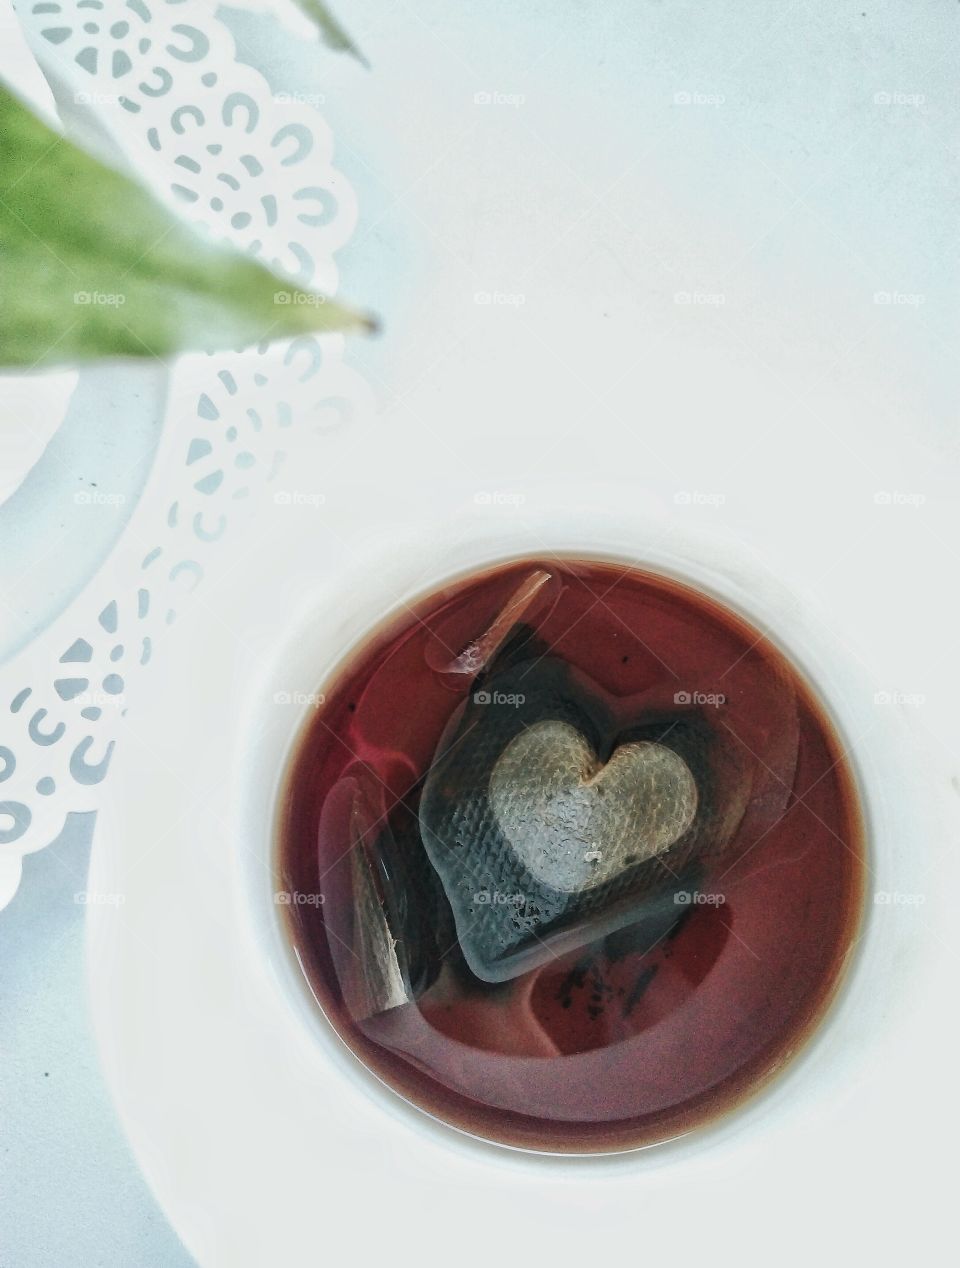 Teabag with heart shaped air bubble inside